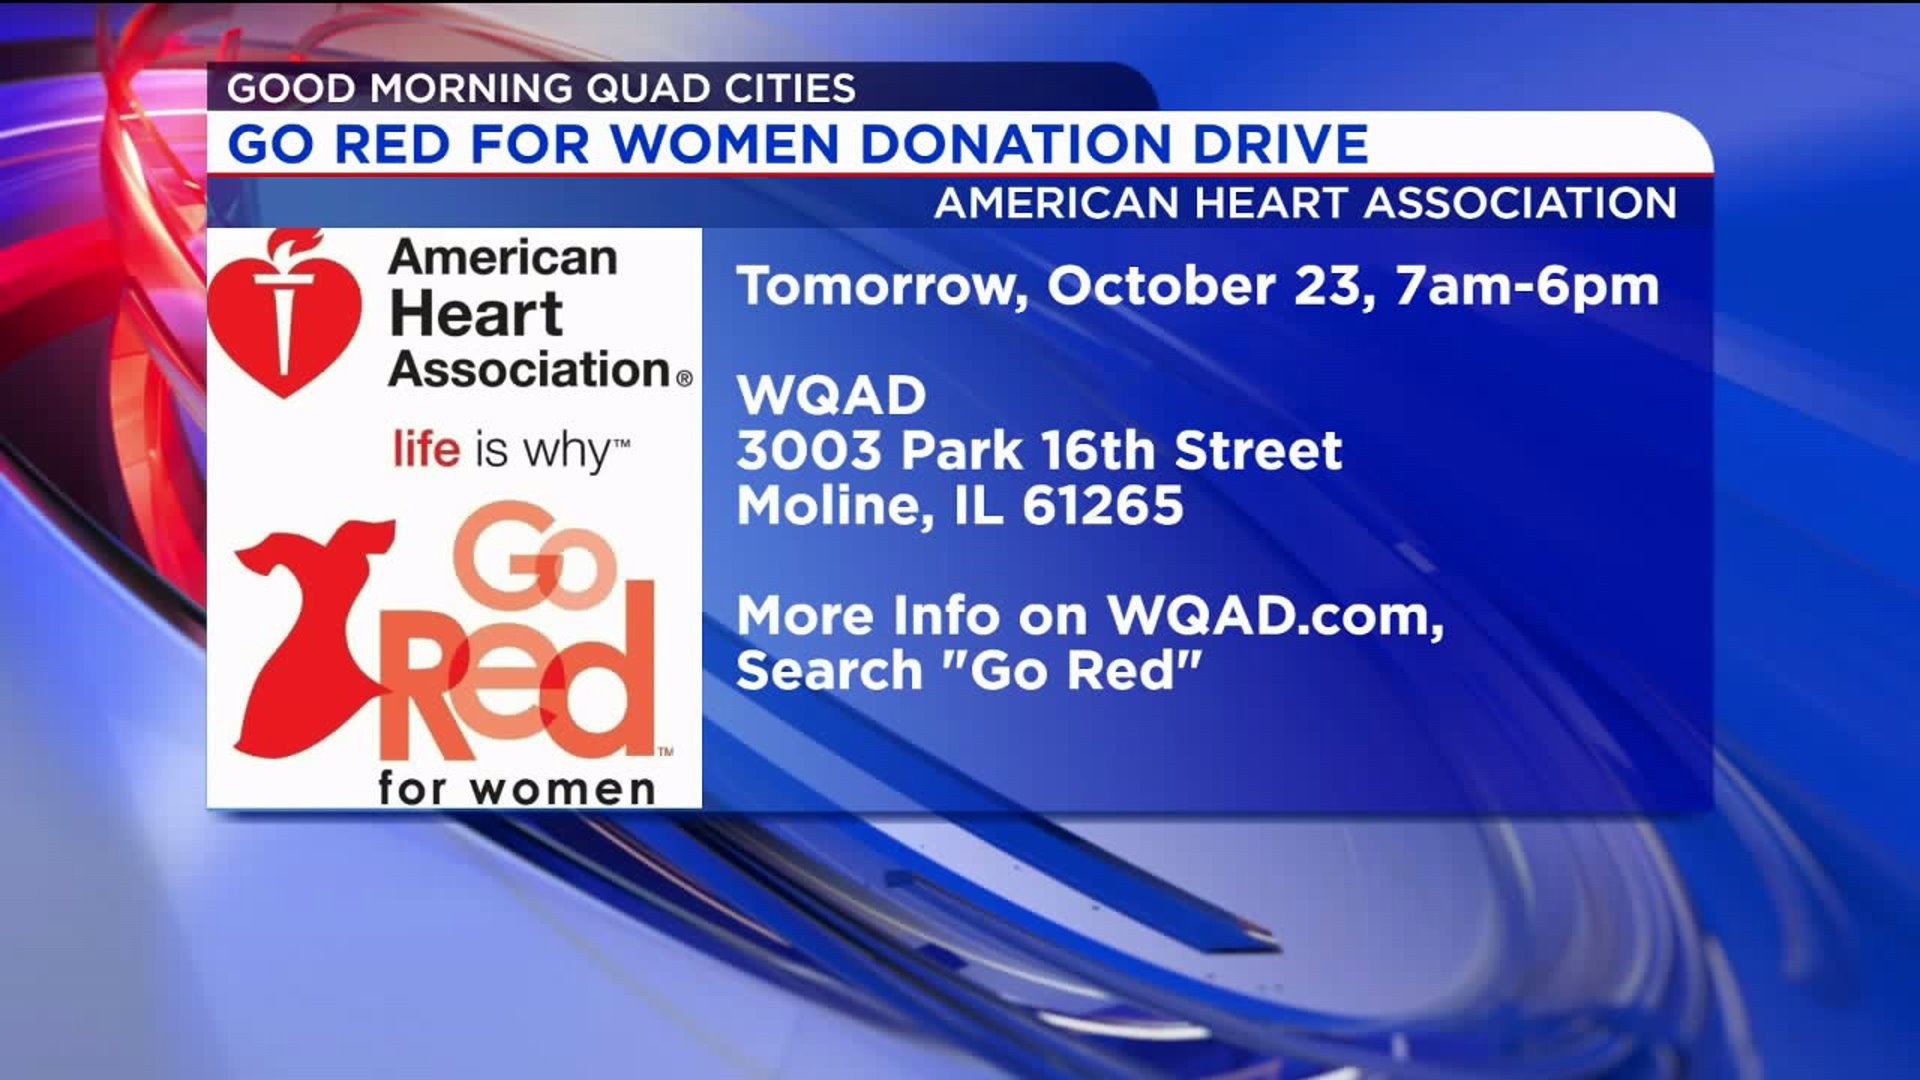 Go Red for Women Donation Drive Takes Place Wednesday, October 23rd